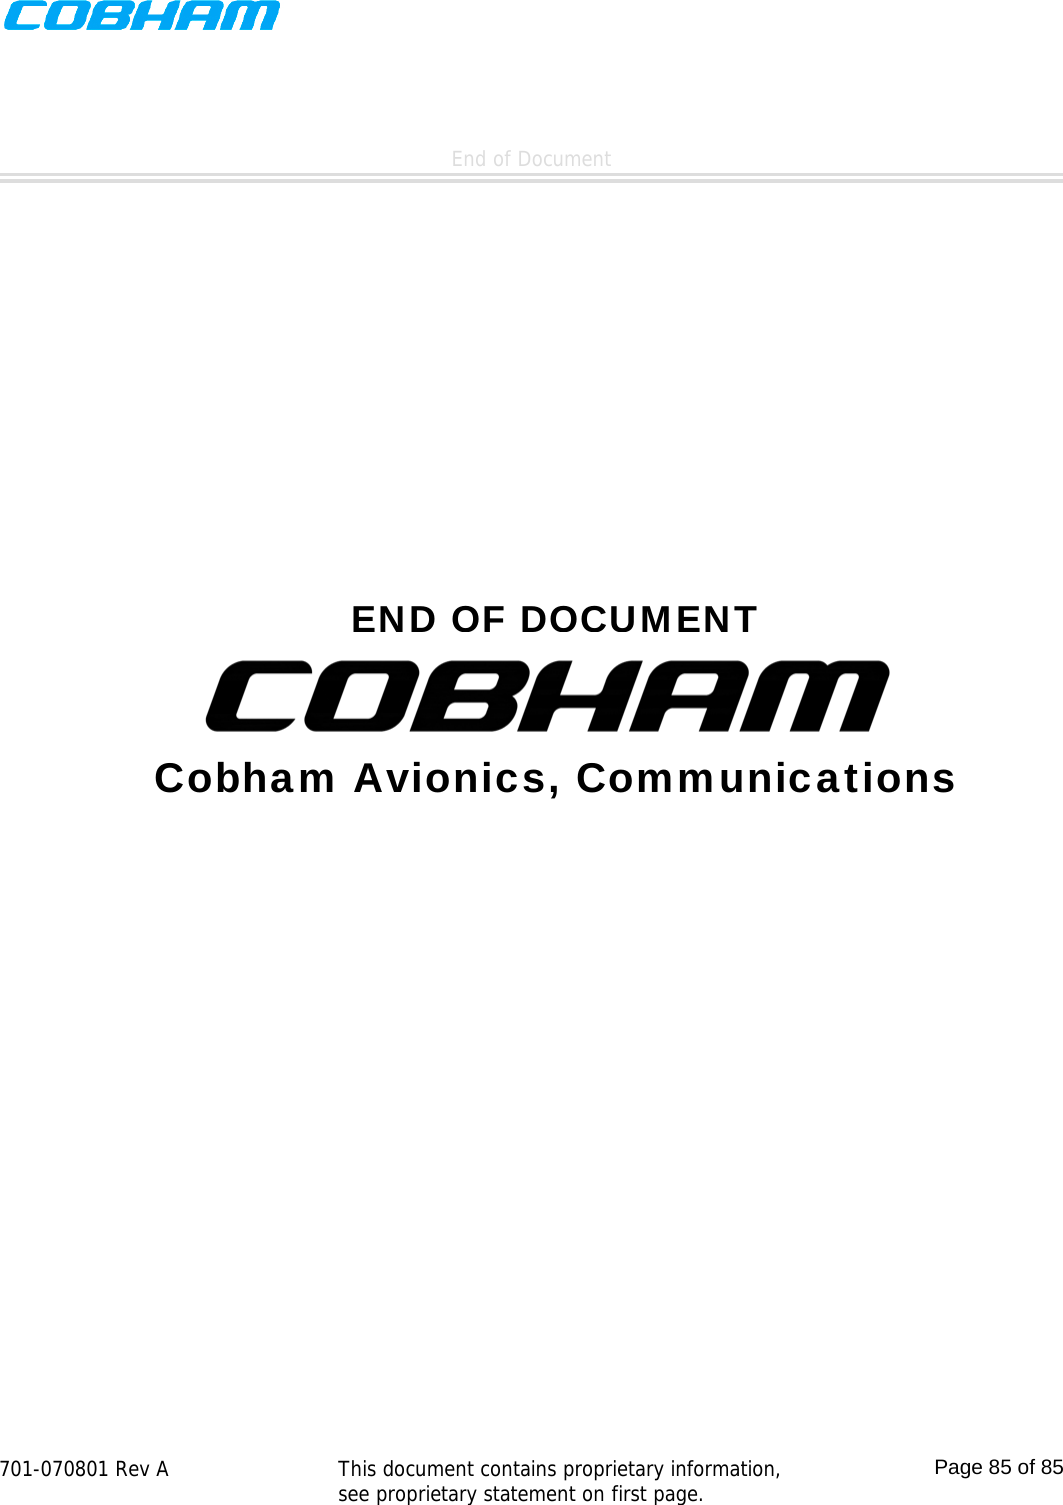    701-070801 Rev A   This document contains proprietary information, see proprietary statement on first page.  Page 85 of 85     End of Document  END OF DOCUMENT Cobham Avionics, Communications 